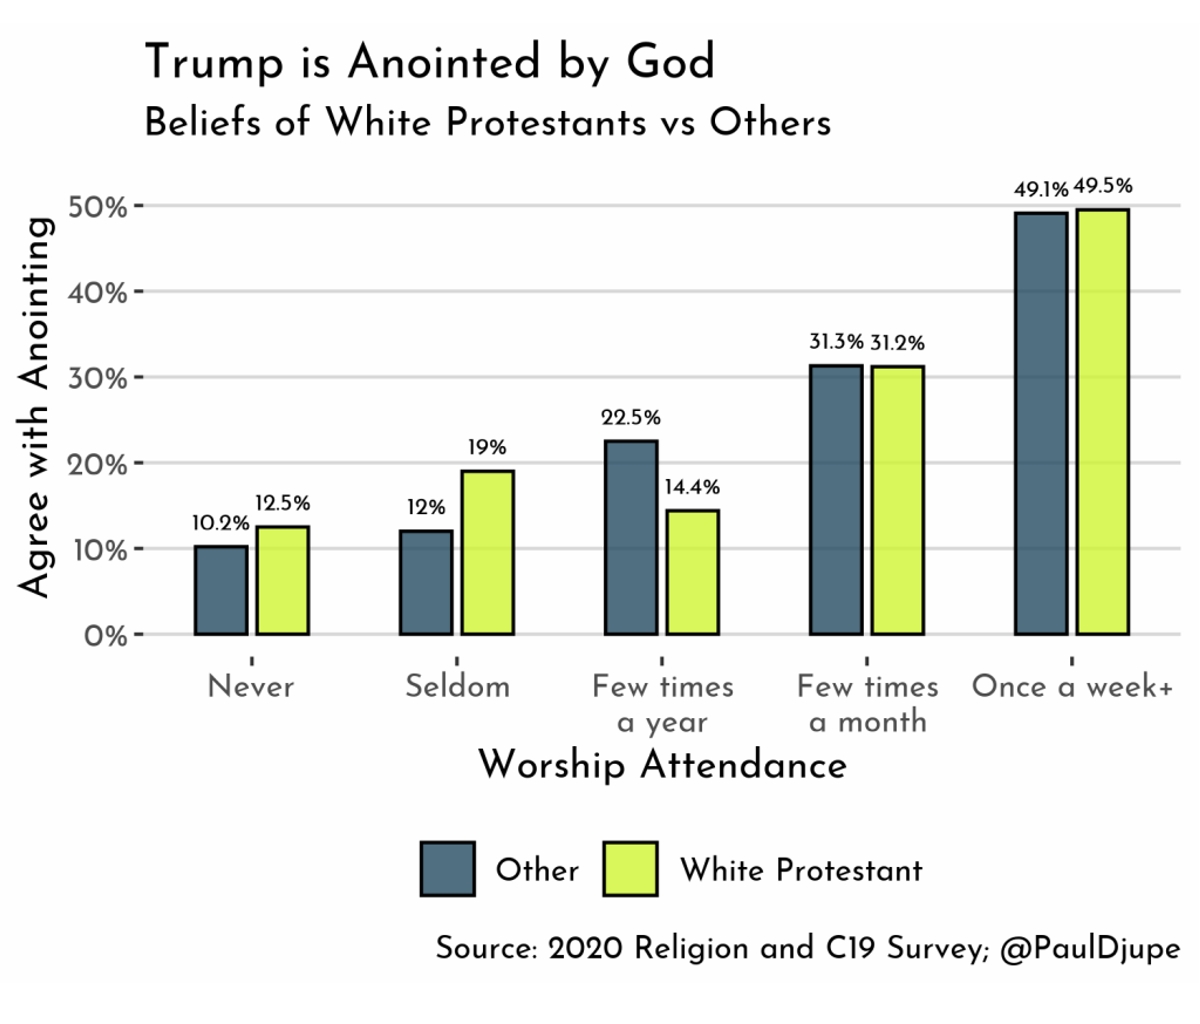 Why white and non-white consider Trump annointed one from God